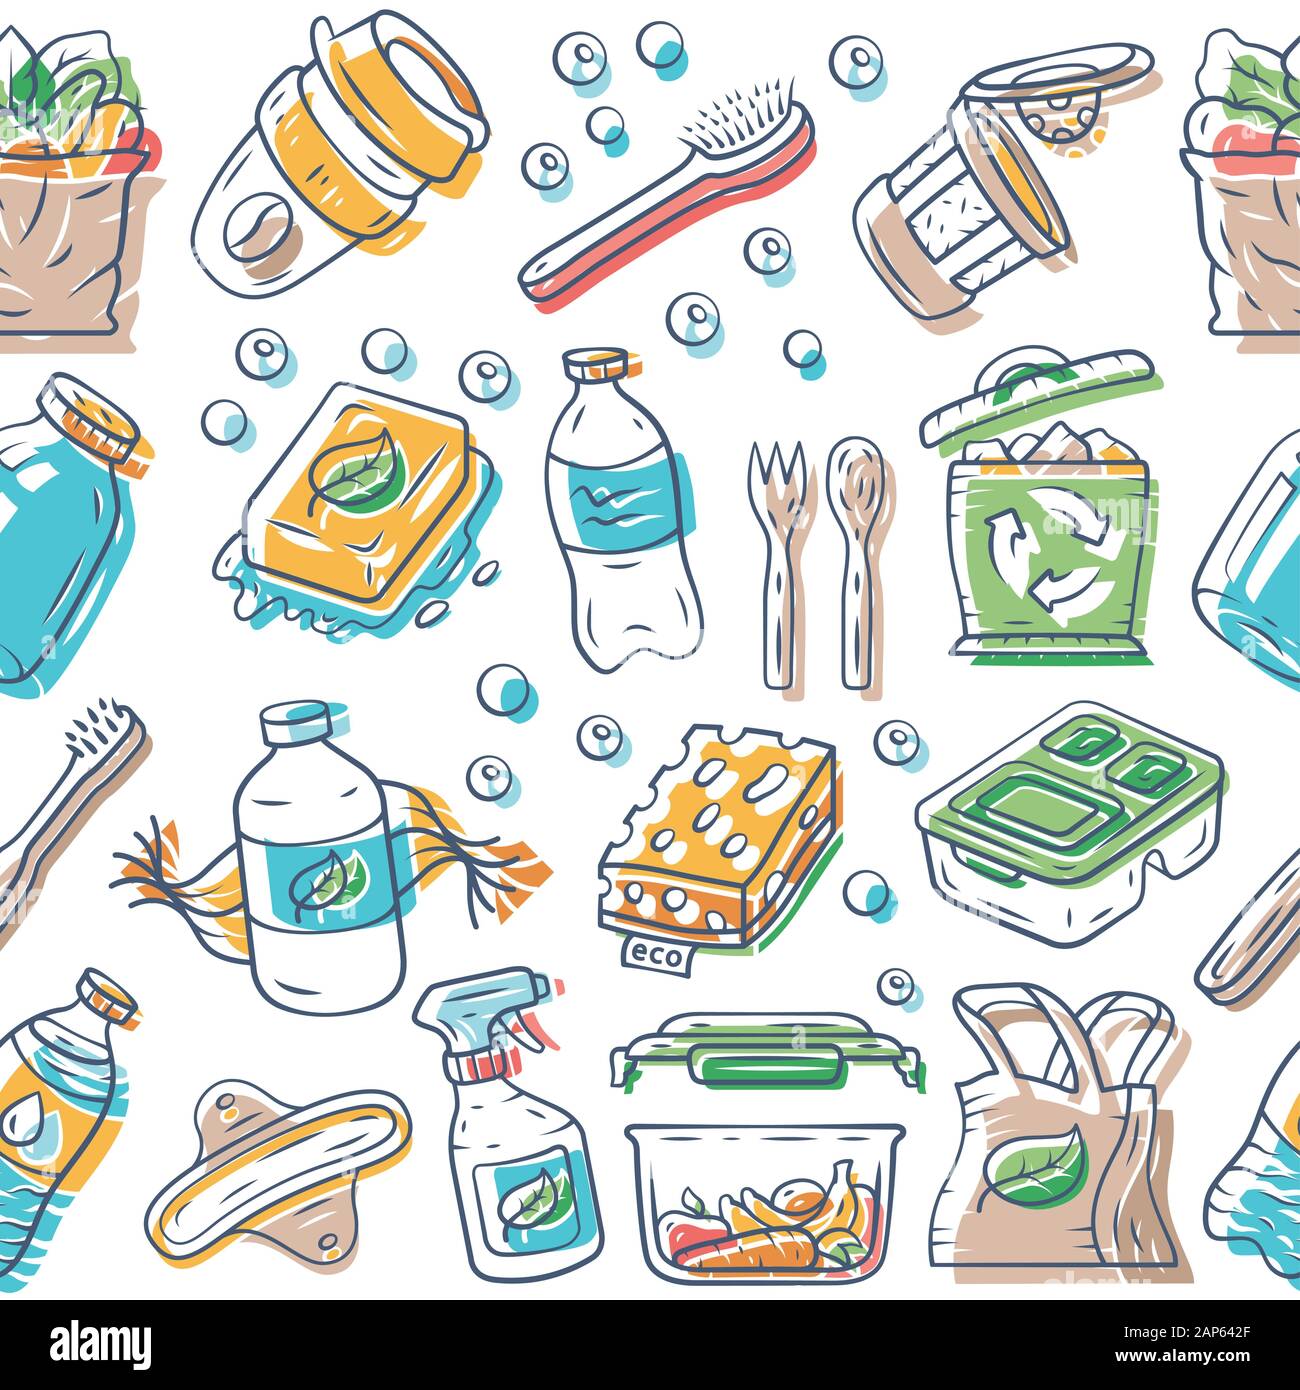 Eco products vector seamless pattern. Natural food background. White texture, hand drawn color icons. Ecological hygiene items. Fruits, vegetables. Or Stock Vector